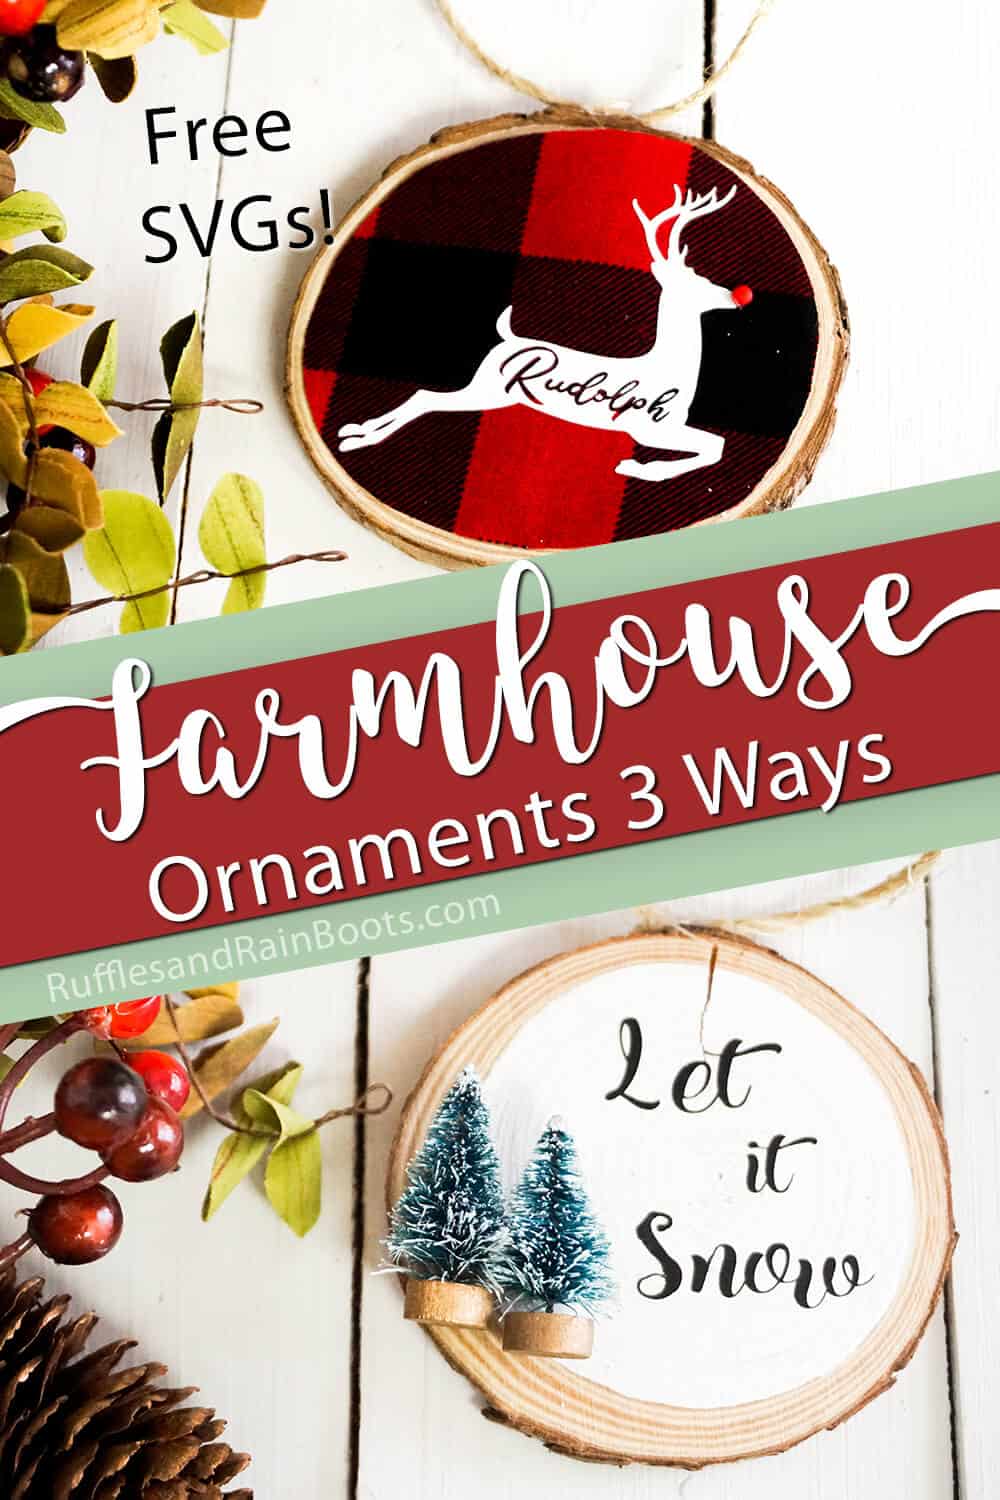 photo collage of wood chip ornaments made on the cricut with text which reads Free SVGs Farmhouse Ornaments 3 ways